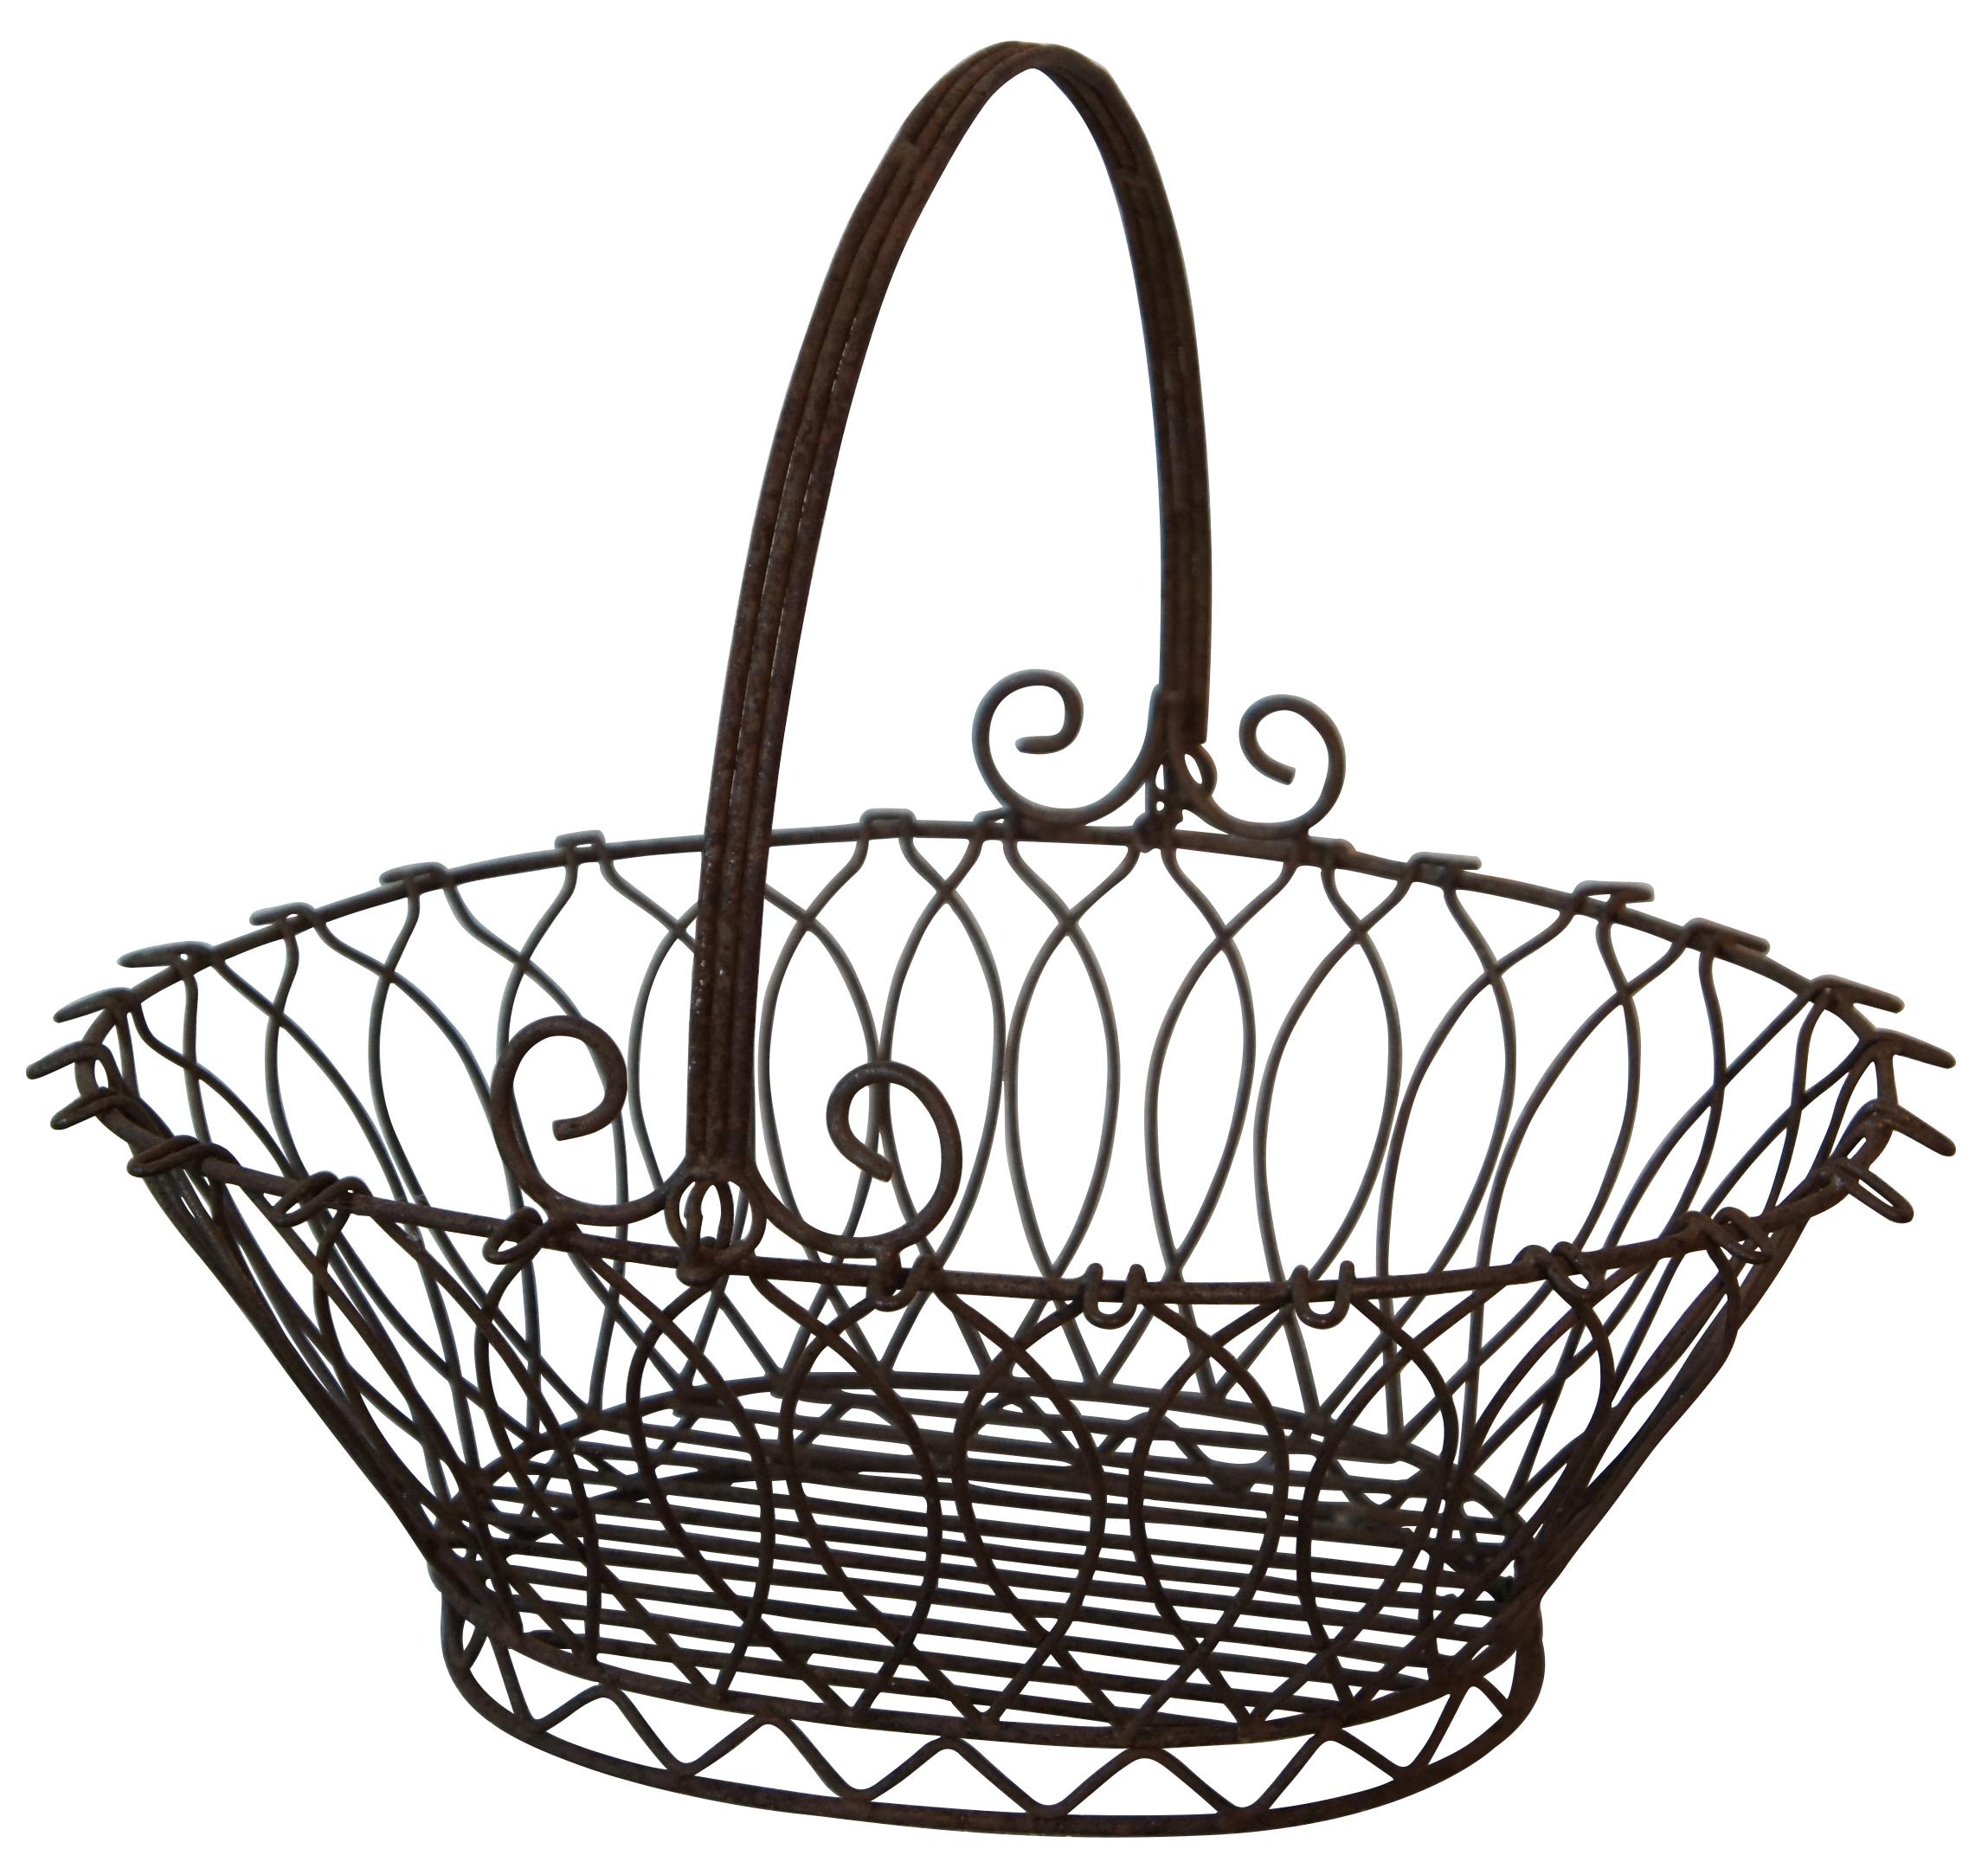 Antique ornate French Provincial wire basket with rotating handle.

Measures: 16.5” x 13.5” x 7.5” / Height of Handle – 8” (Width x Depth x Height).
 